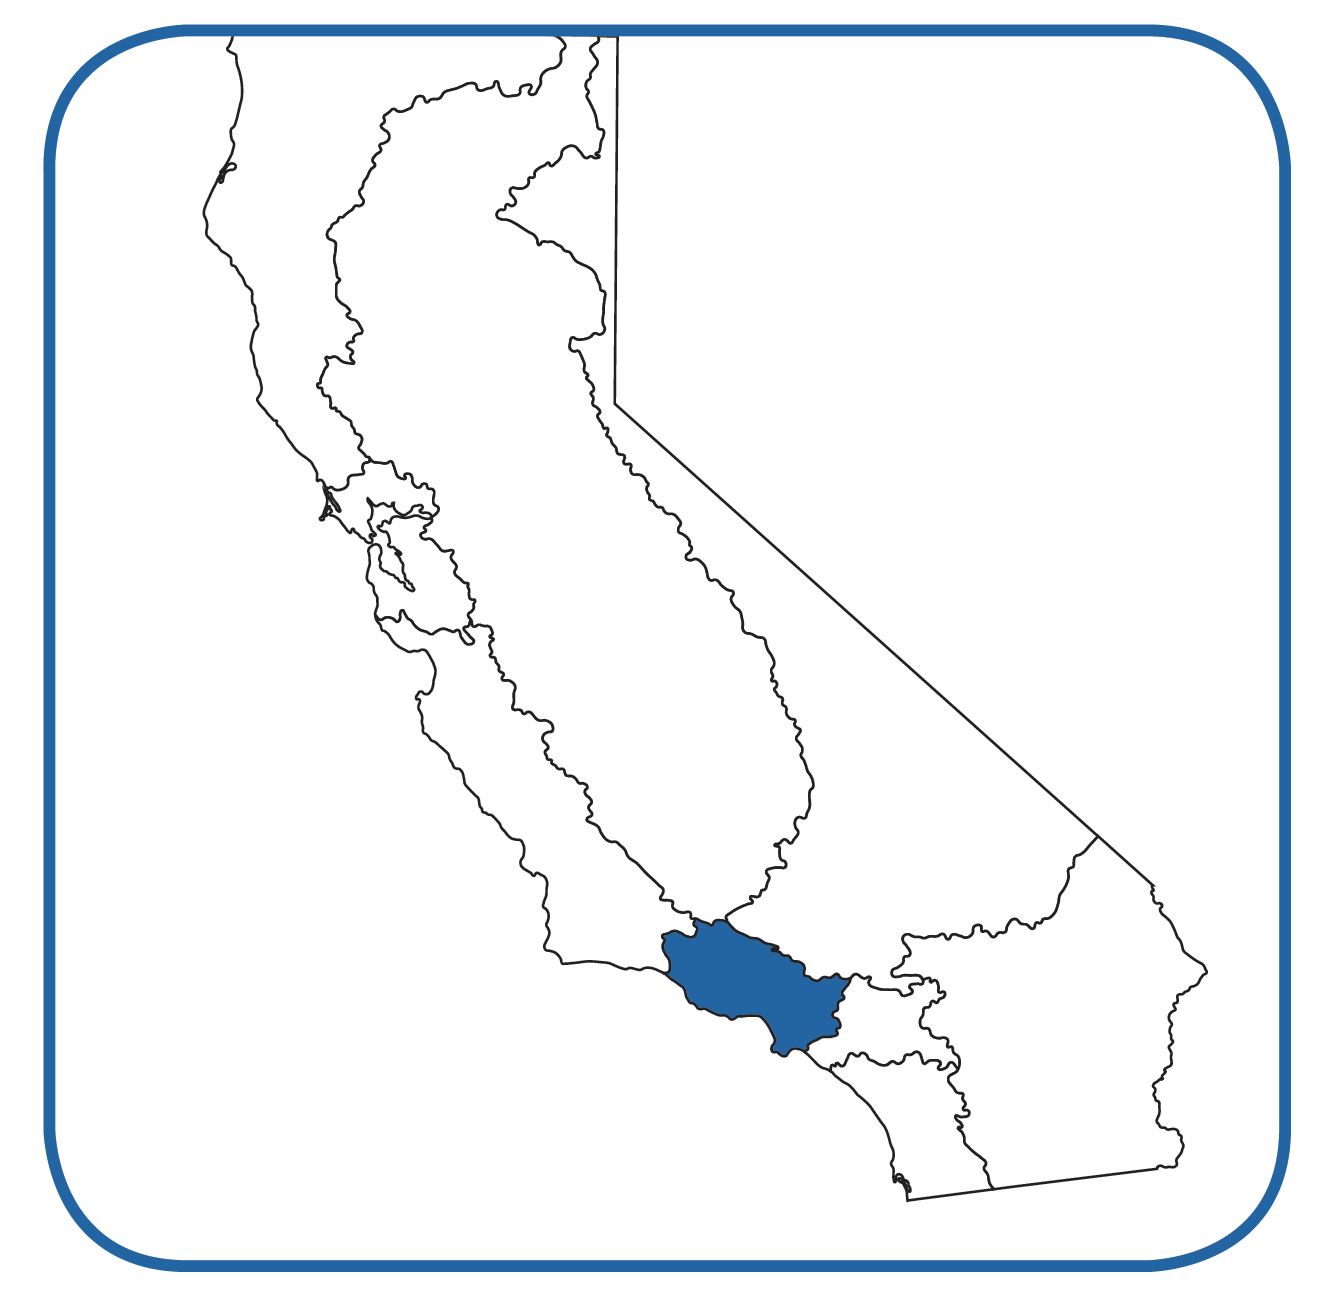 California Map with LA region highlighted